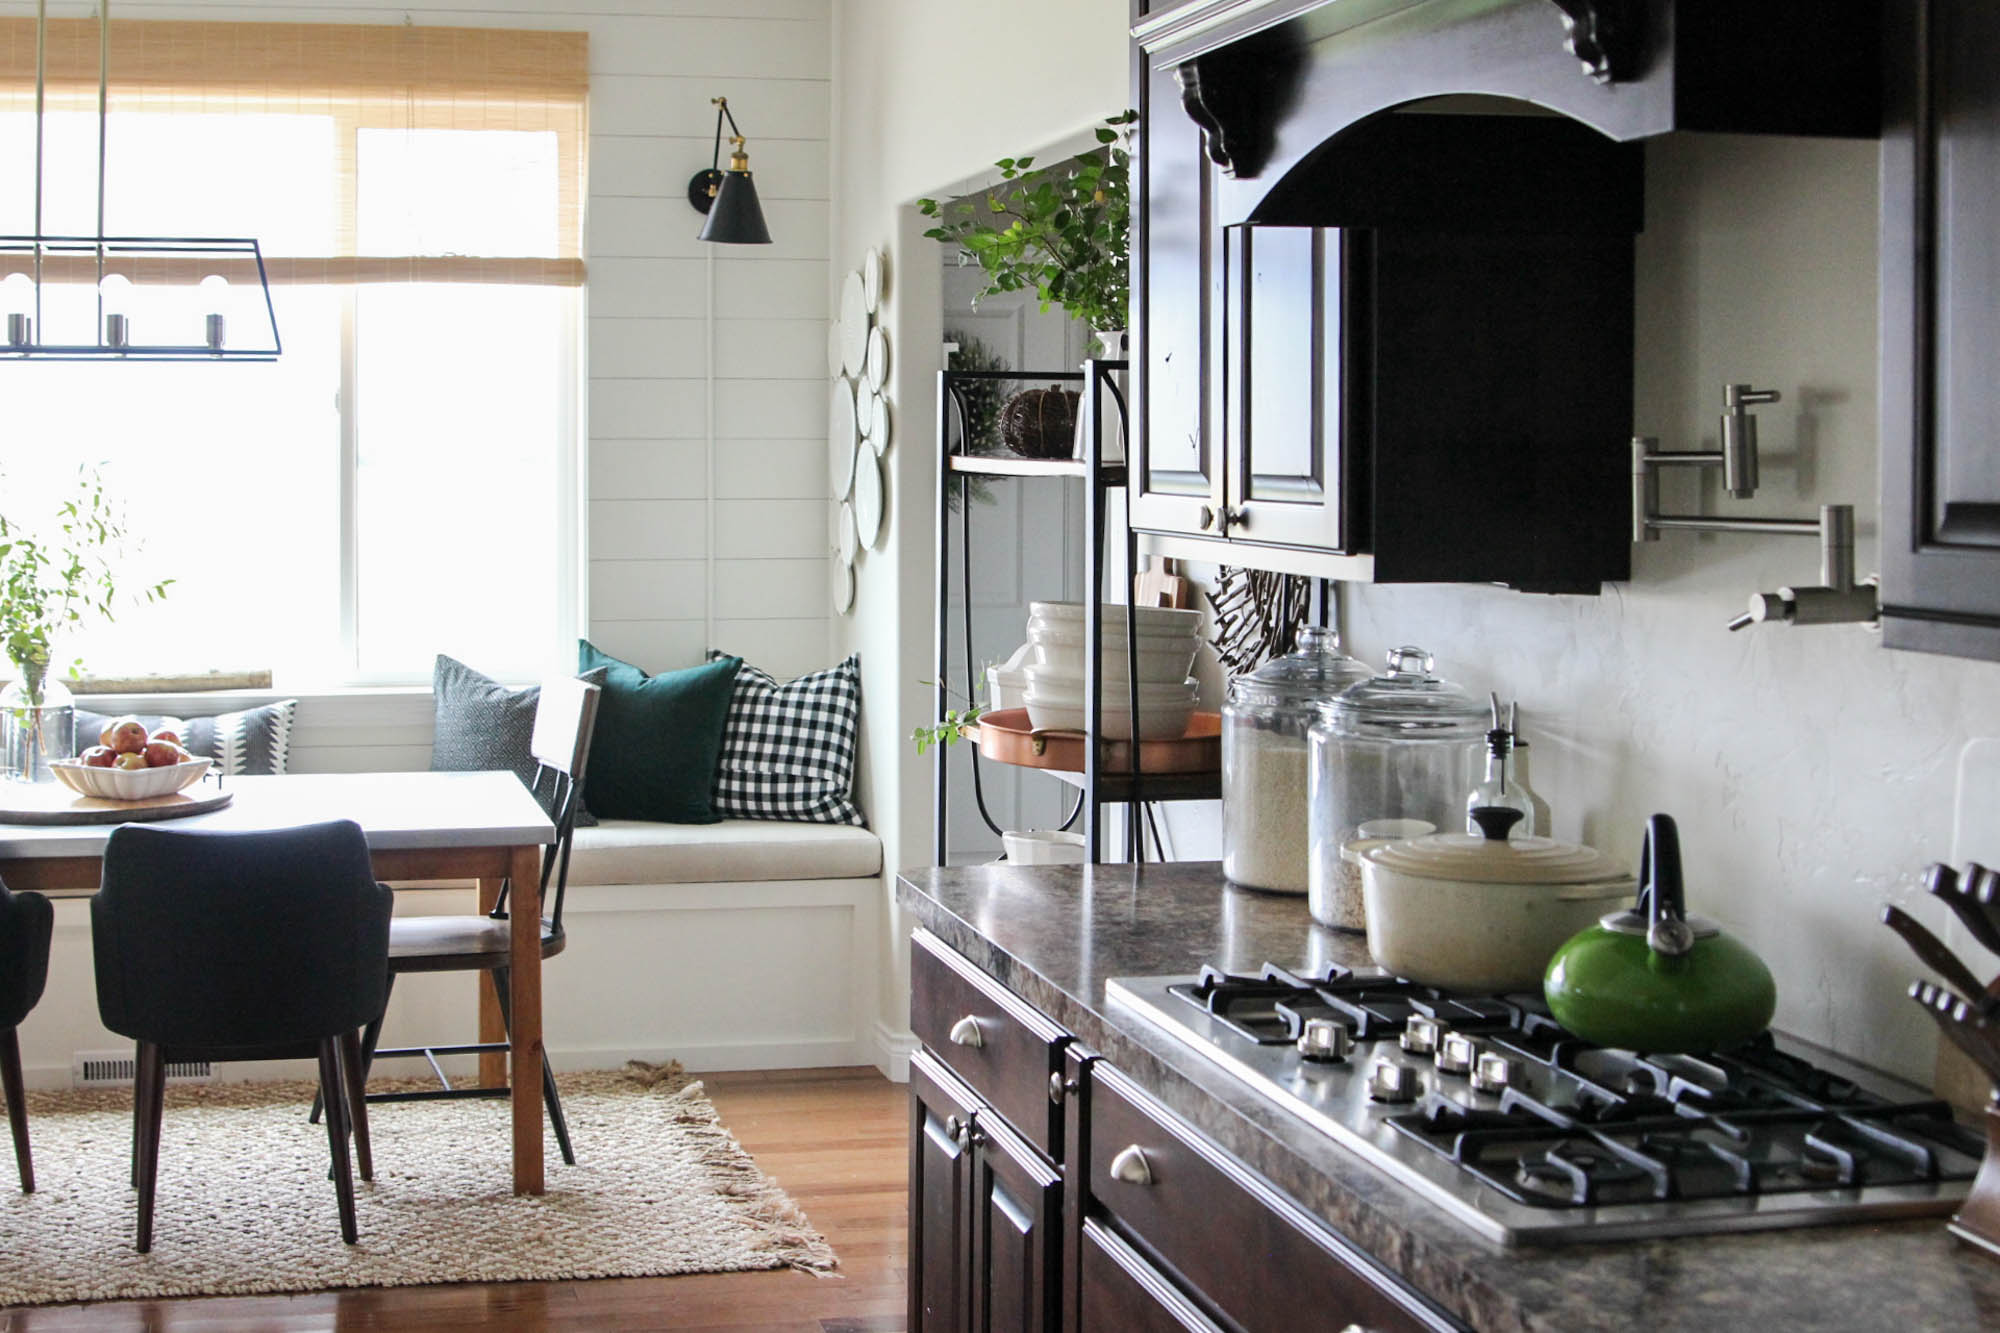 A picture of a kitchen and breakfast nook.